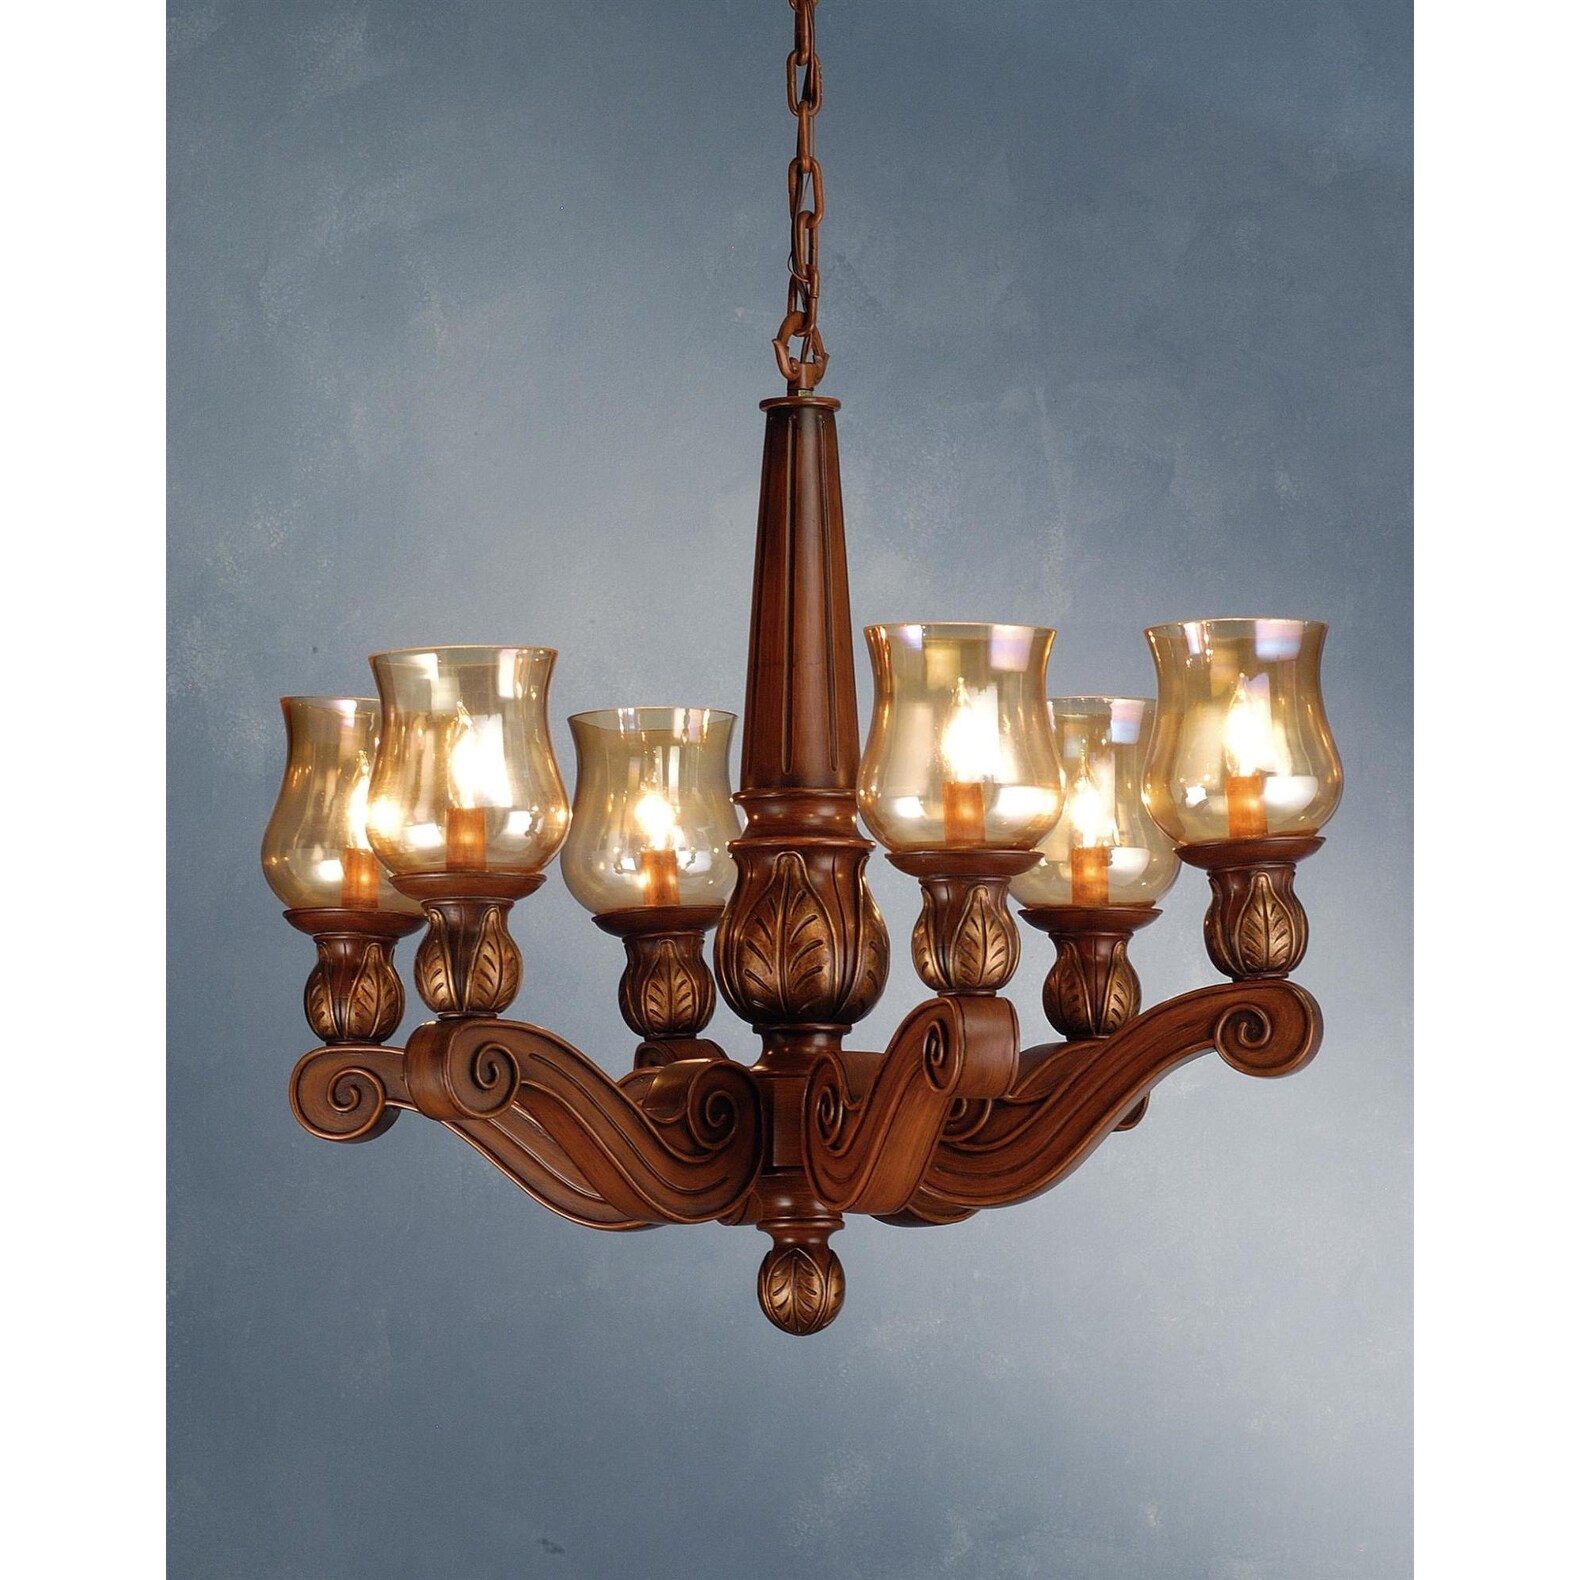 Meyda Tiffany Light Up Lighting Chandelier from the Kendall Bed Bath   Beyond 13126740